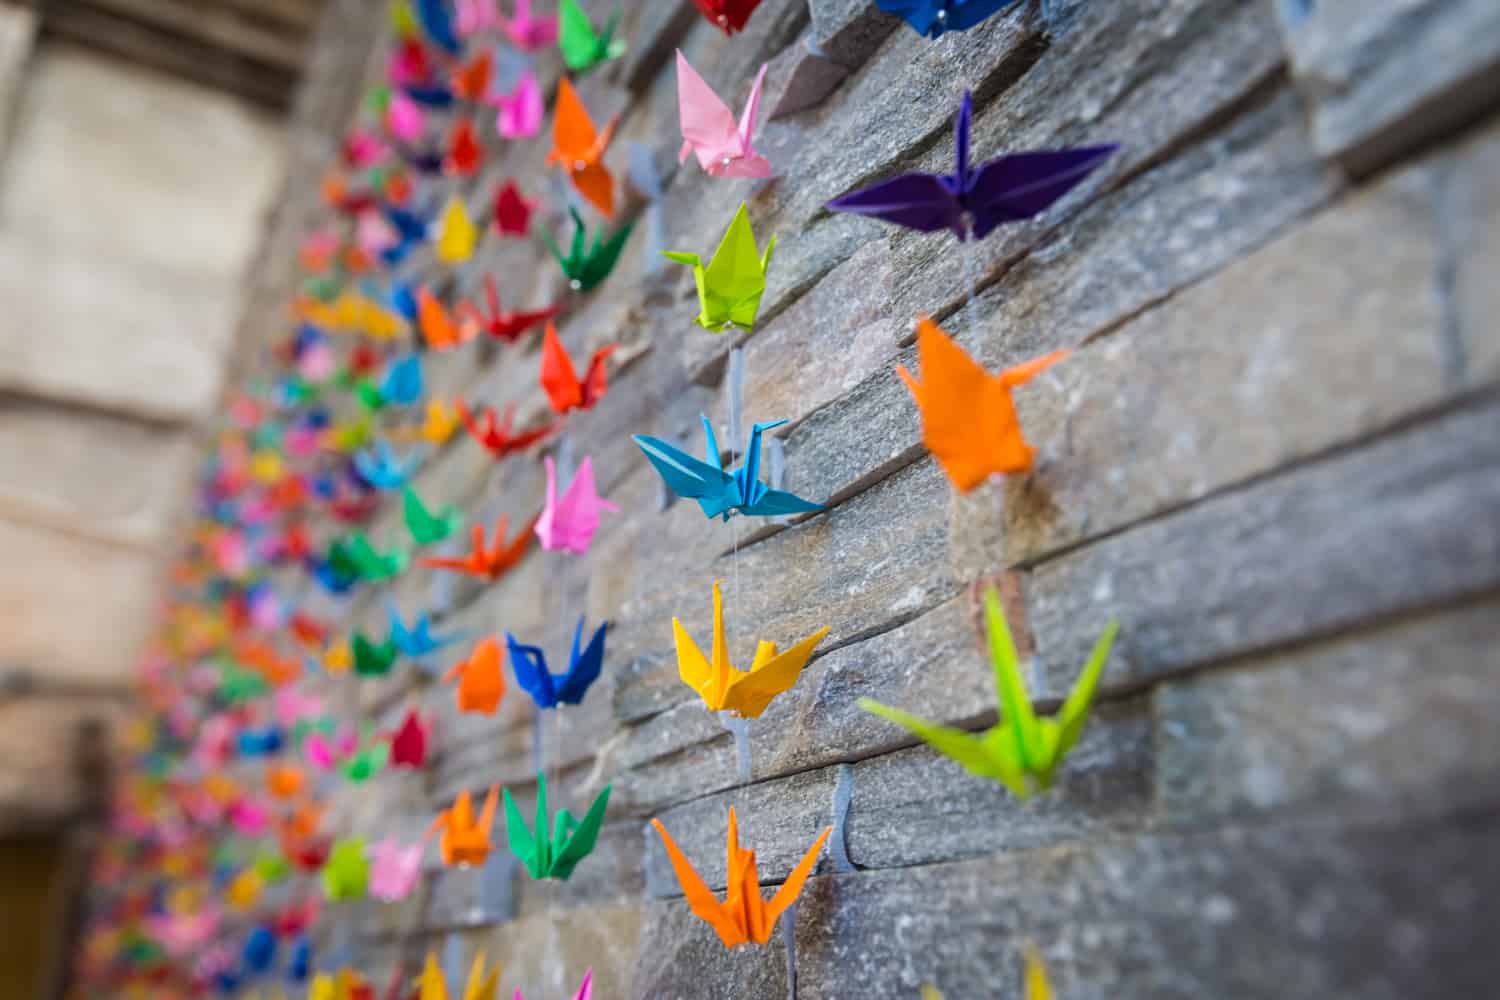 Stone wall with multicolored origami cranes hanging over the wall